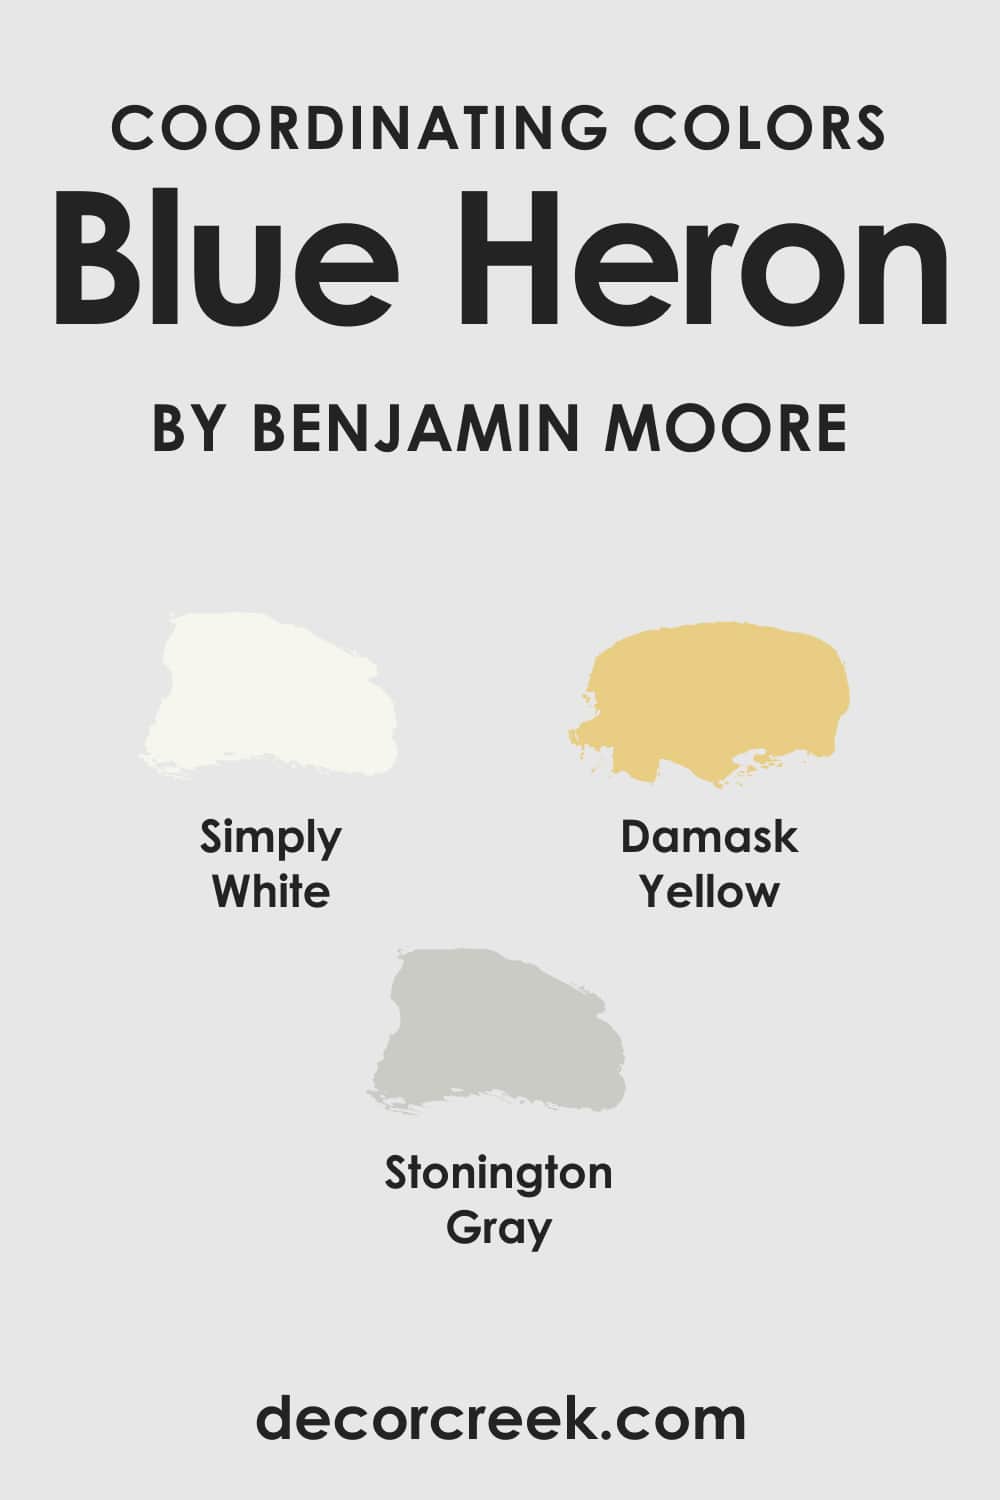 Coordinating Colors For BM Blue Heron